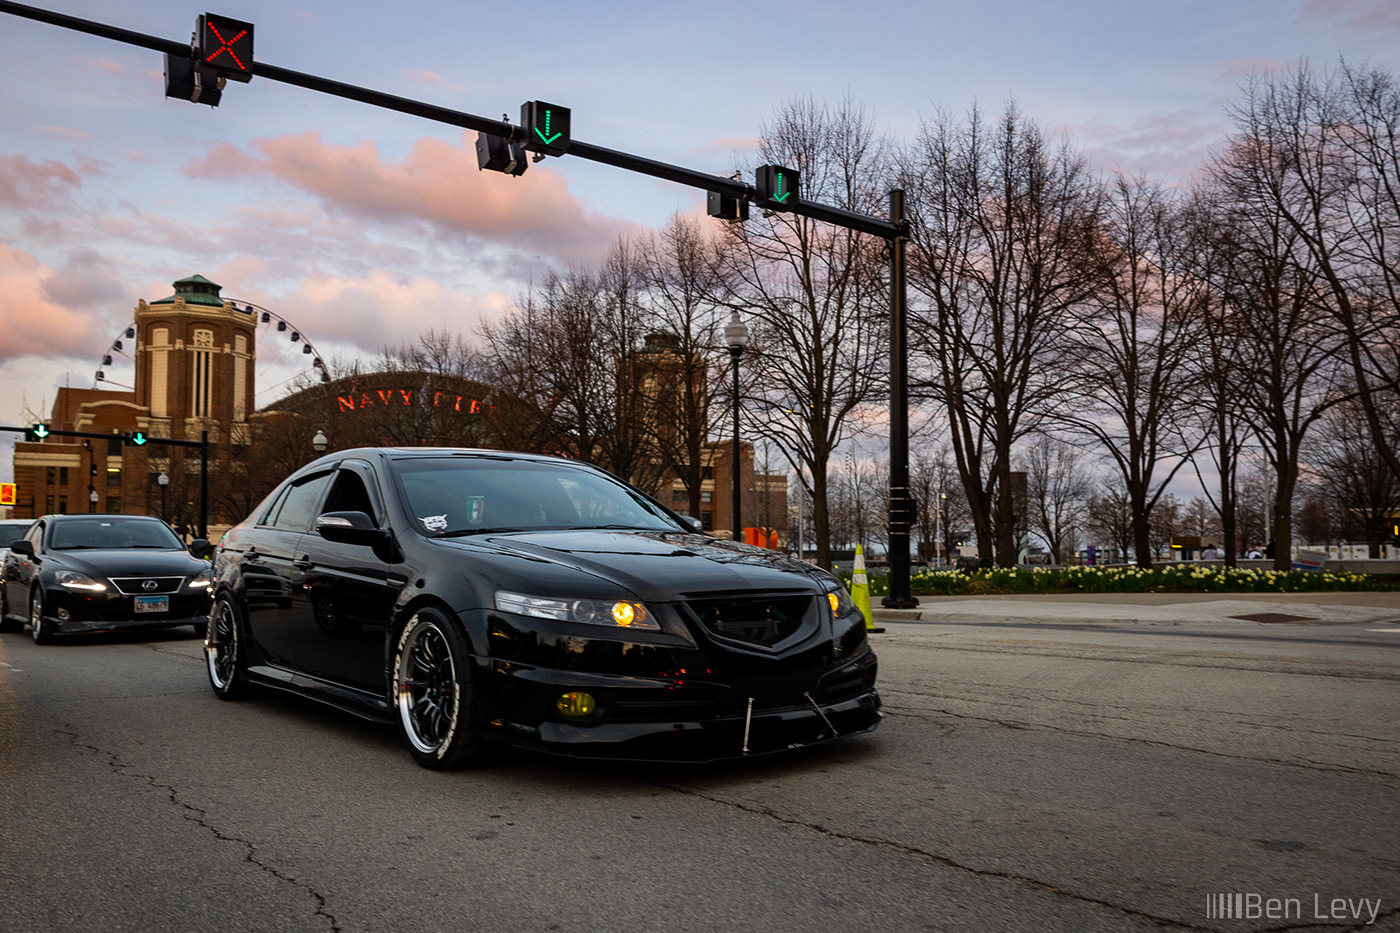 Black Acura TL in Chicago At Sunset